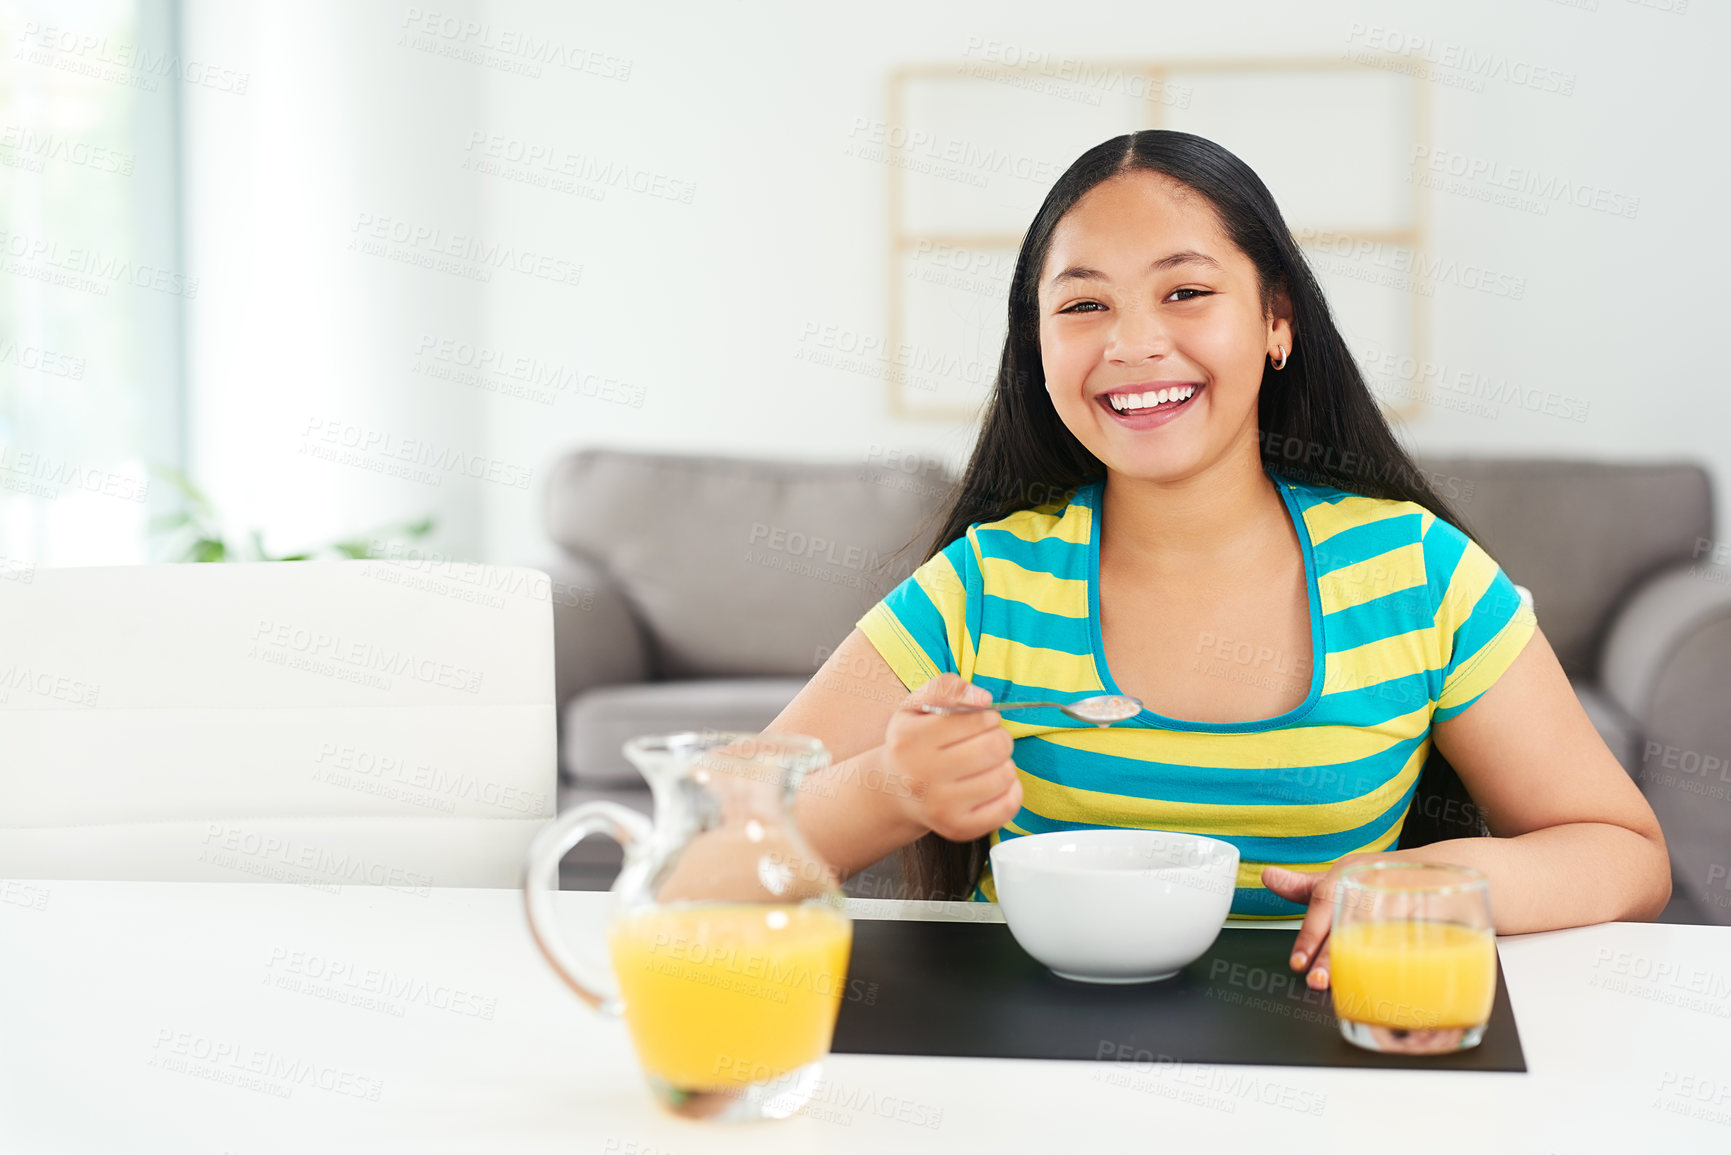 Buy stock photo Portrait, happy girl and smile in home with breakfast, juice and excited for healthy diet in morning. Nutrition, growth and development, hungry child at table with cereal and drink at start of day